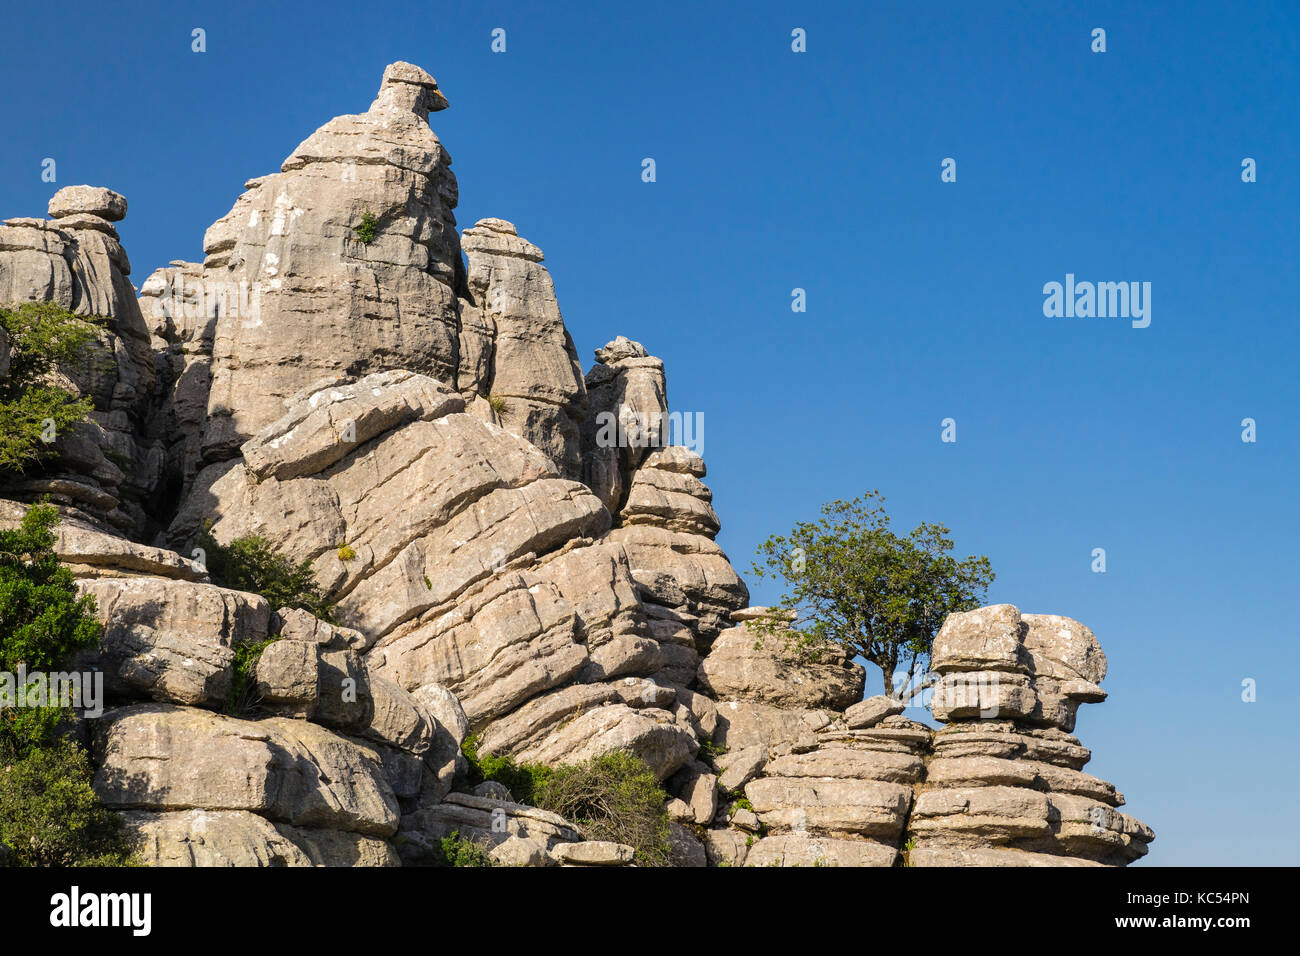 Bizarre limestone rock formations, El Torcal Nature Reserve, Antequera, Province of Malaga, Andalusia, Spain Stock Photo